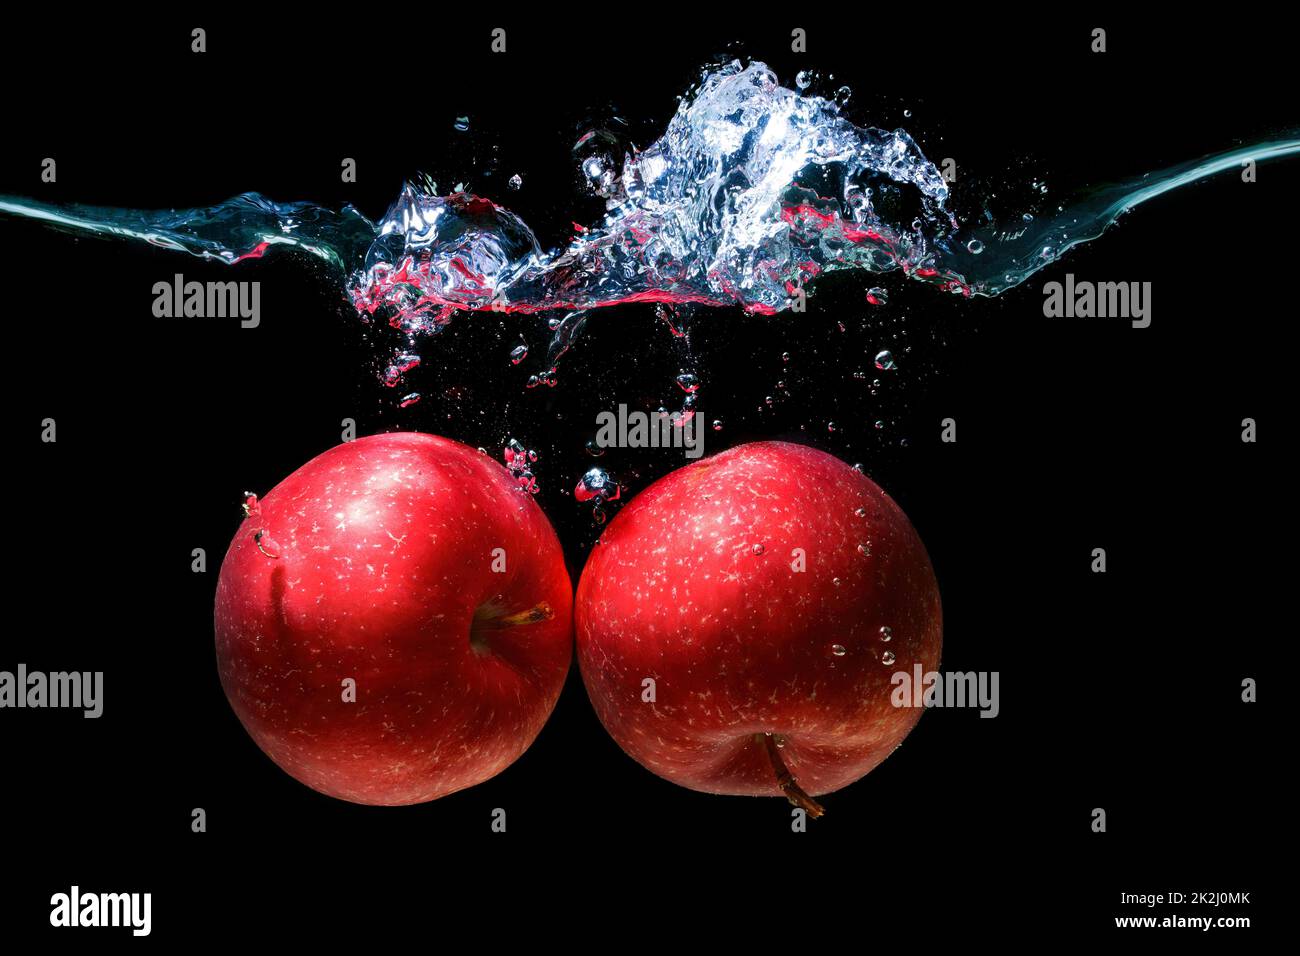 Close-up of two red apples thrown underwater with splashes on black. Stock Photo